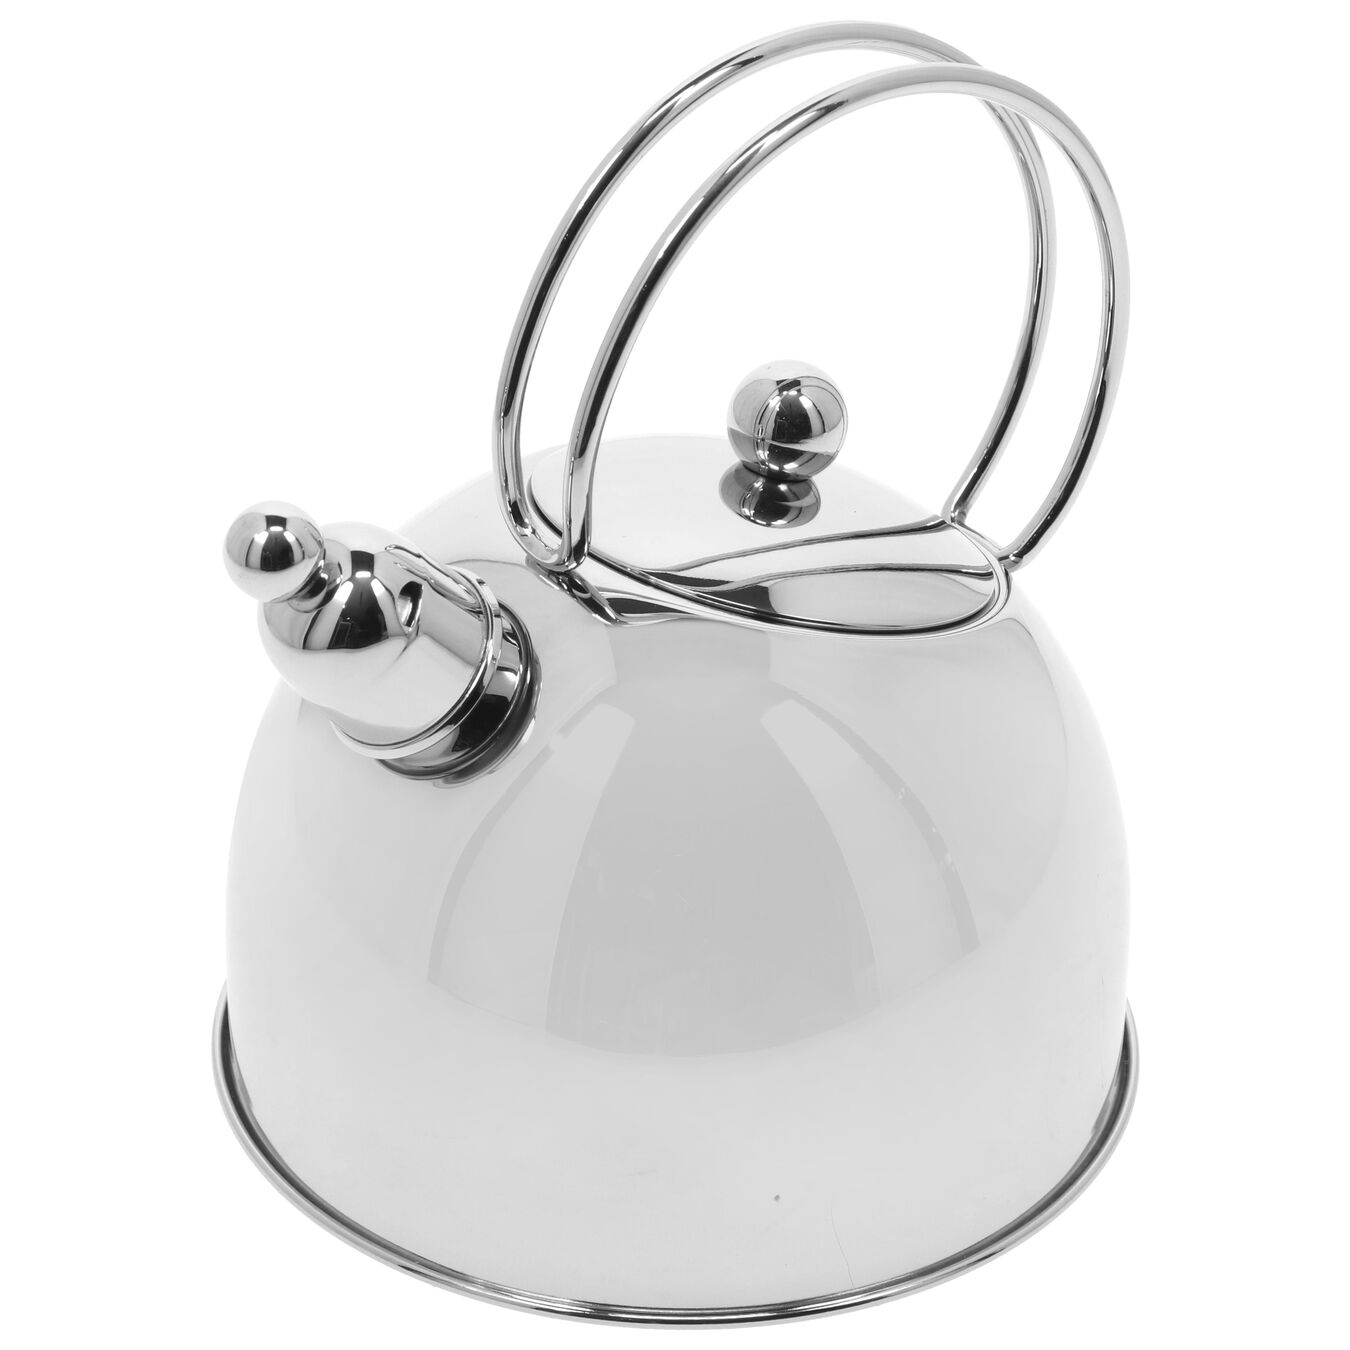 2.6 qt Whistling Tea Kettle, 18/10 Stainless Steel ,,large 2